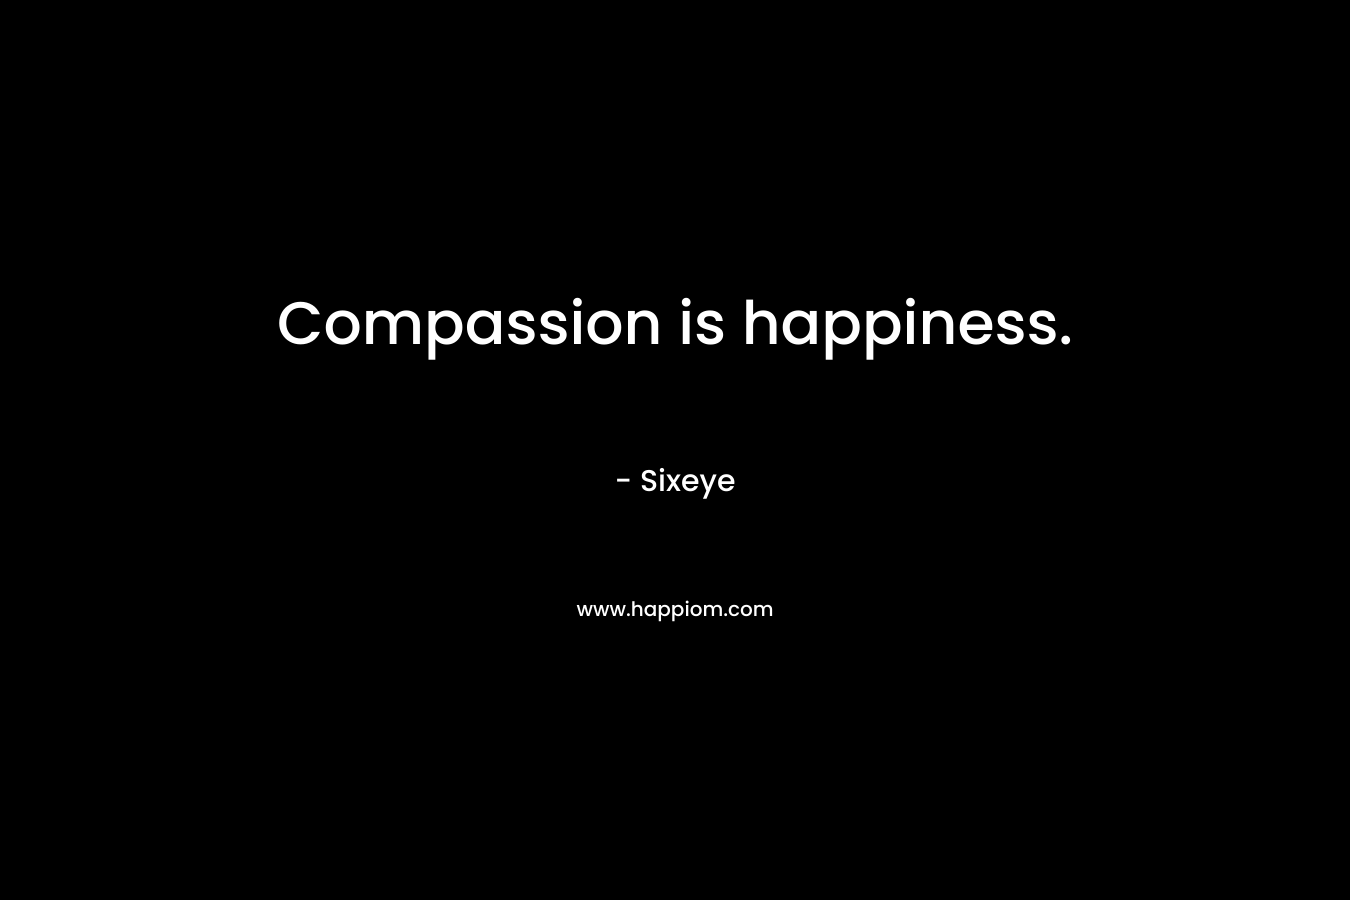 Compassion is happiness.